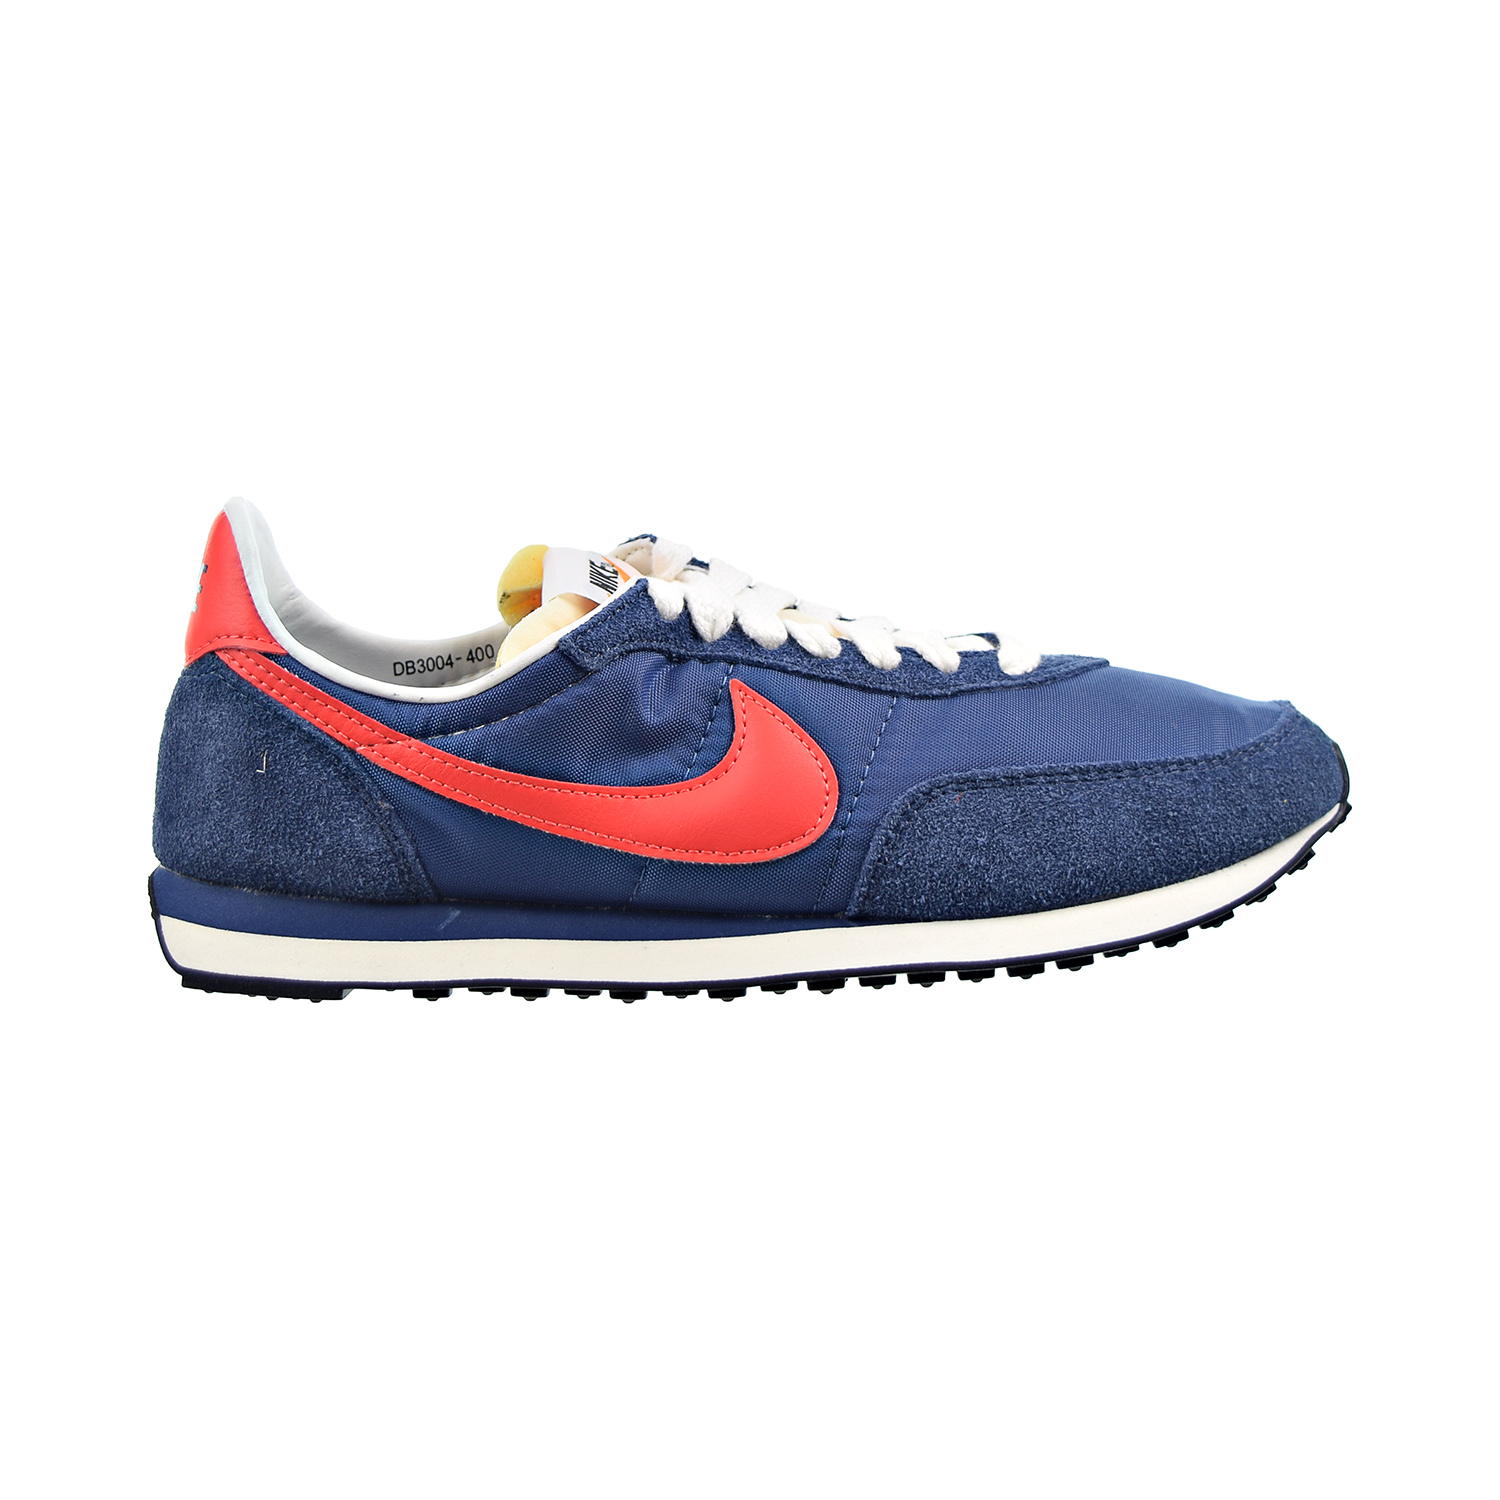 Nike Waffle Trainer 2 SP Men's Shoes Midnight Navy-Max Orange